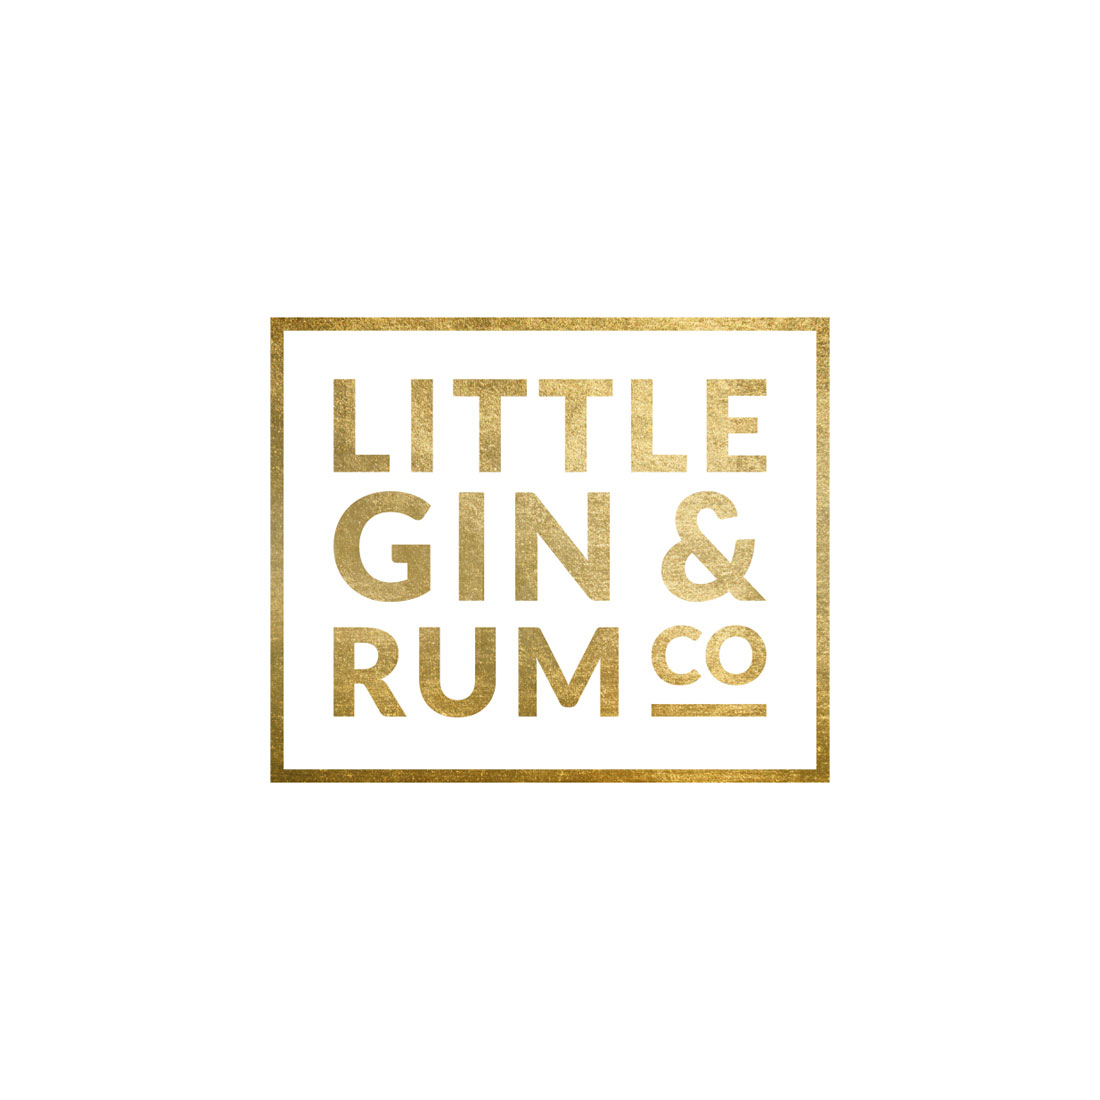 Meth-web-square-1100x1100-gin-and-rum-co-logo